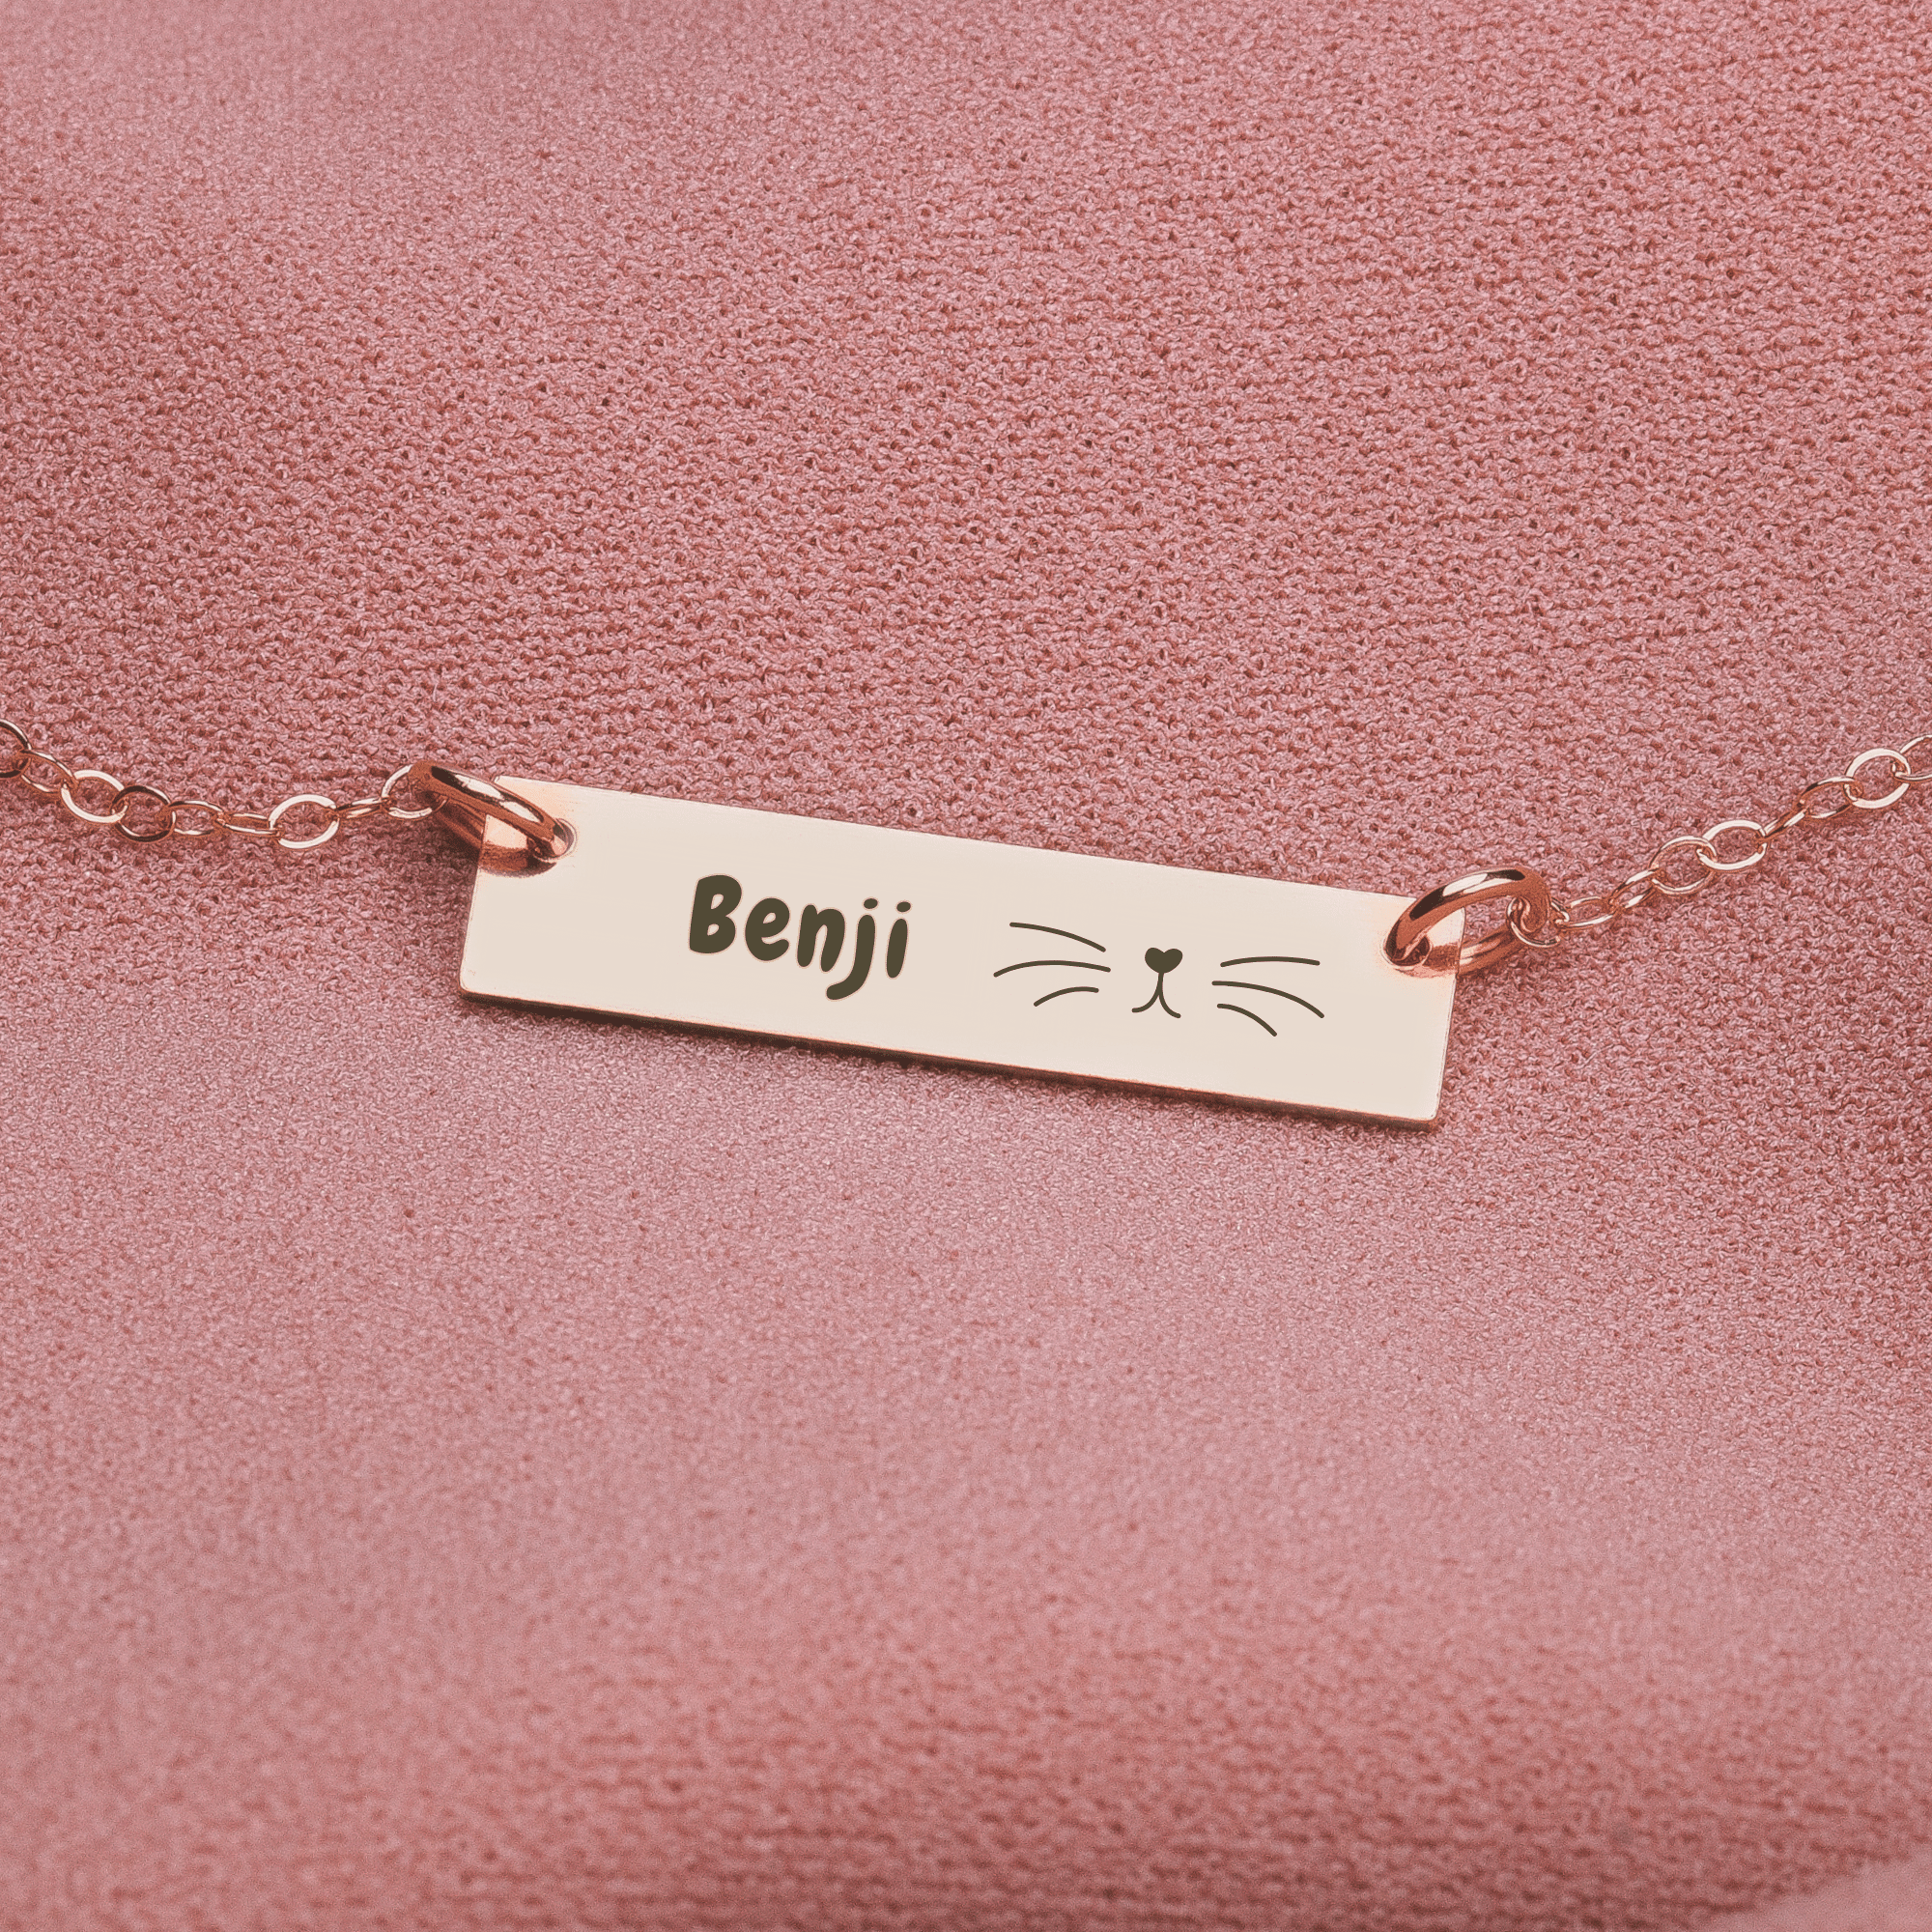 Personalized Name Bar Necklace - Melanie Golden Jewelry - _badge_bestseller, bar necklaces, bestseller, bridesmaid, Engraved Jewelry, motherhood, necklace, personalized, personalized necklace, VALENTINES, wedding, wedding party